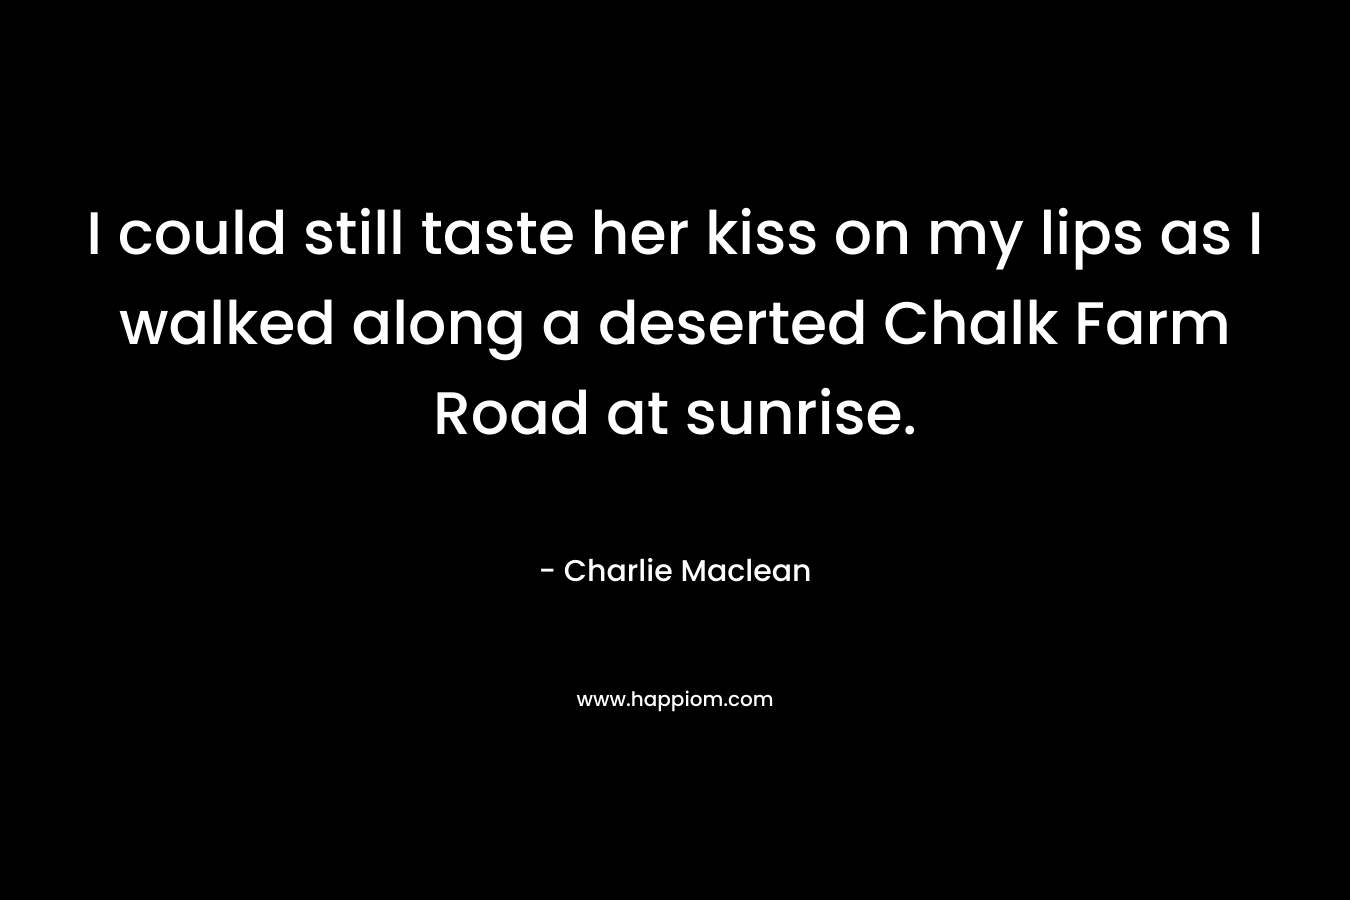 I could still taste her kiss on my lips as I walked along a deserted Chalk Farm Road at sunrise.